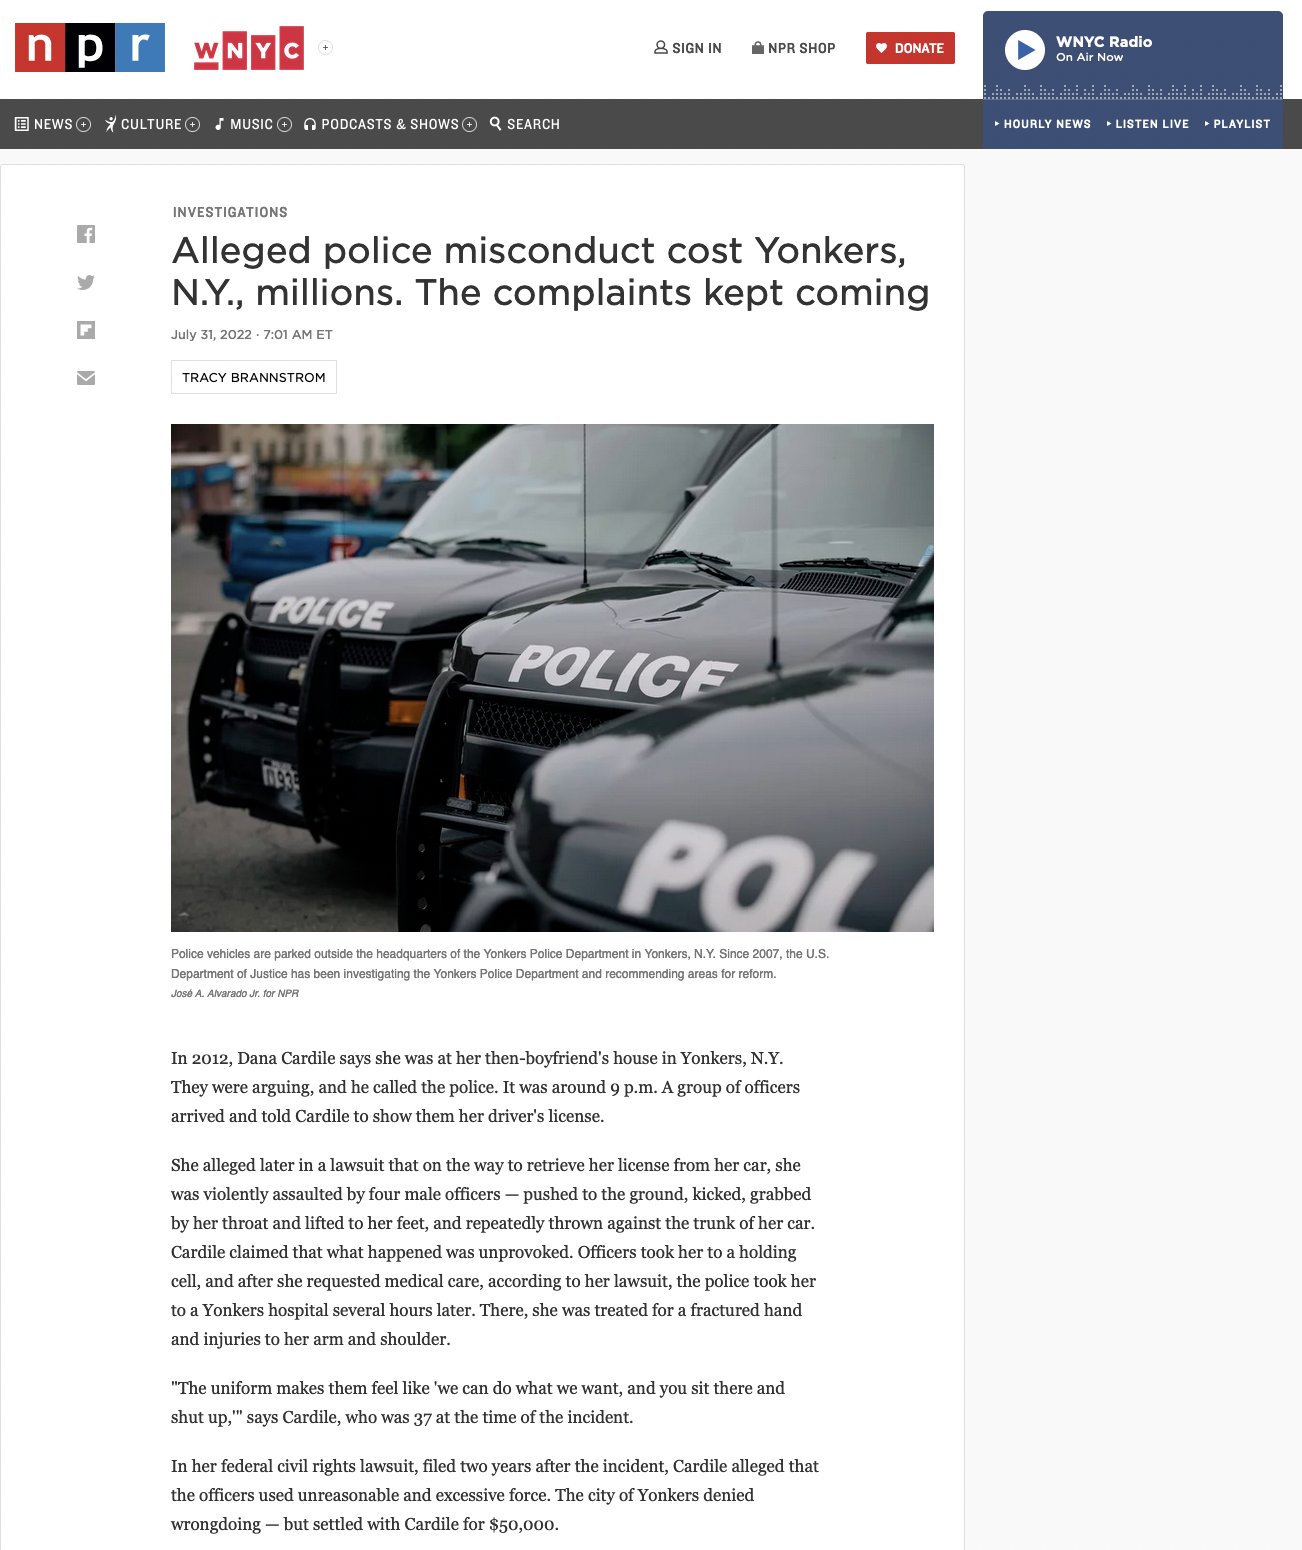 for NPR: Alleged police misconduct cost Yonkers, N.Y., millions. The complaints kept coming